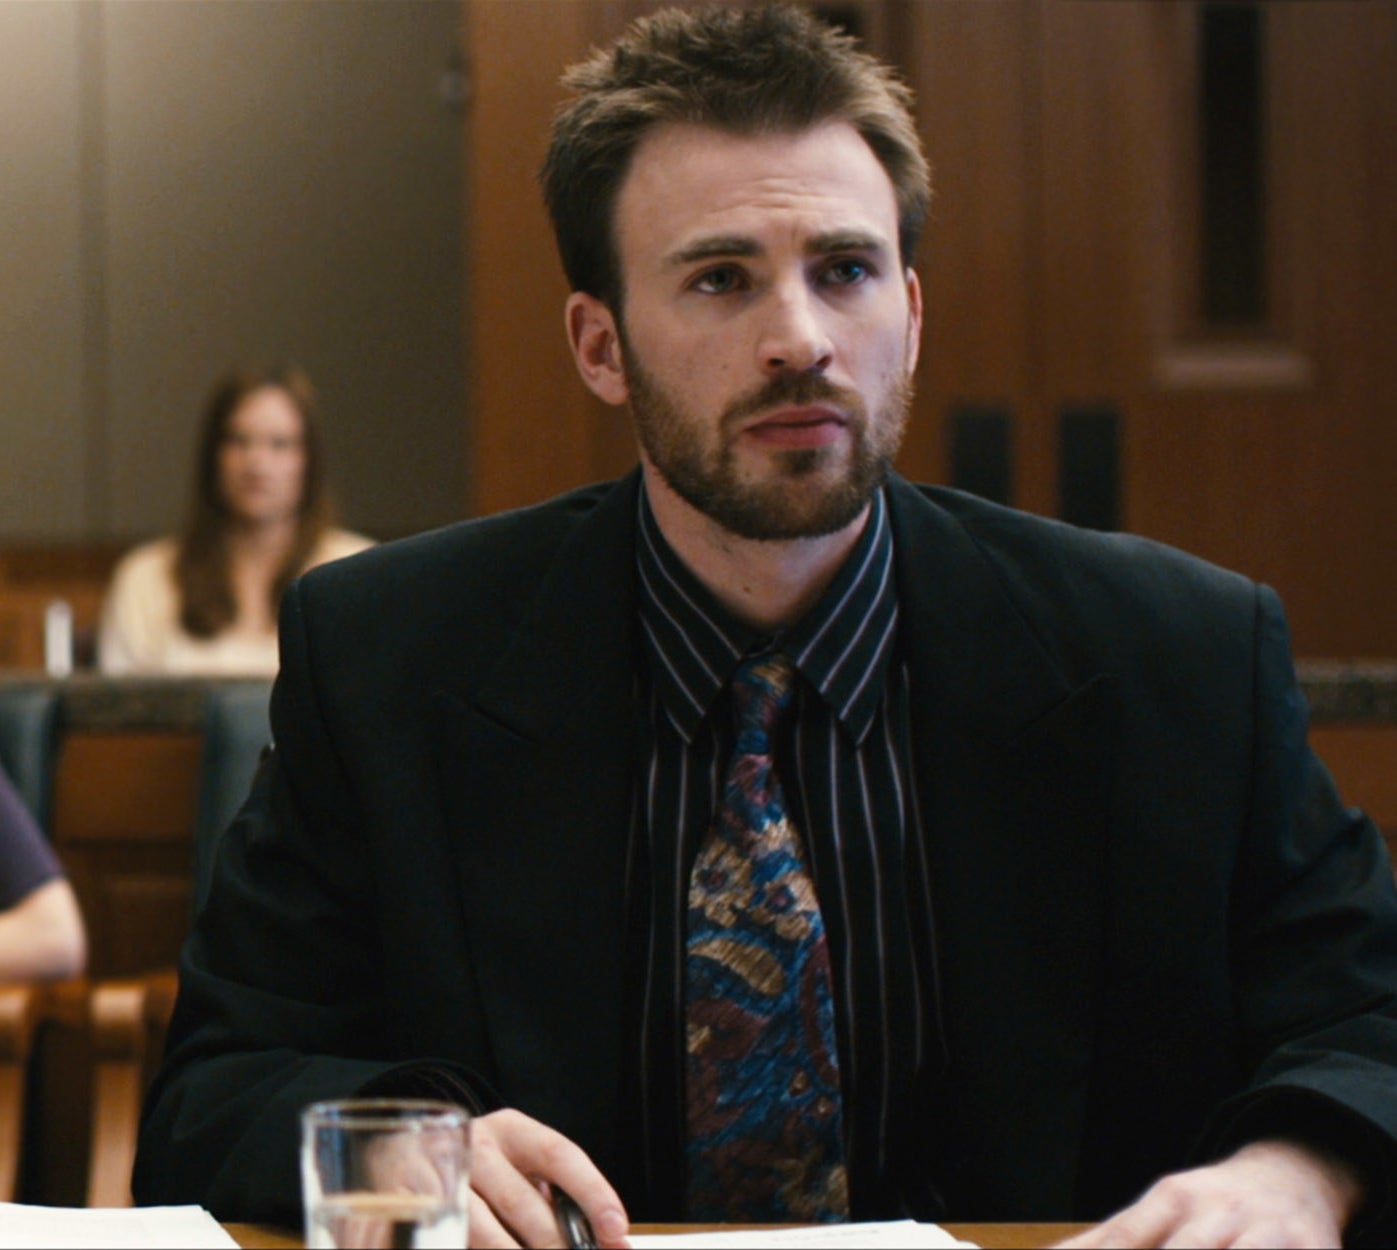 Chris Evans acting in a courtroom setting